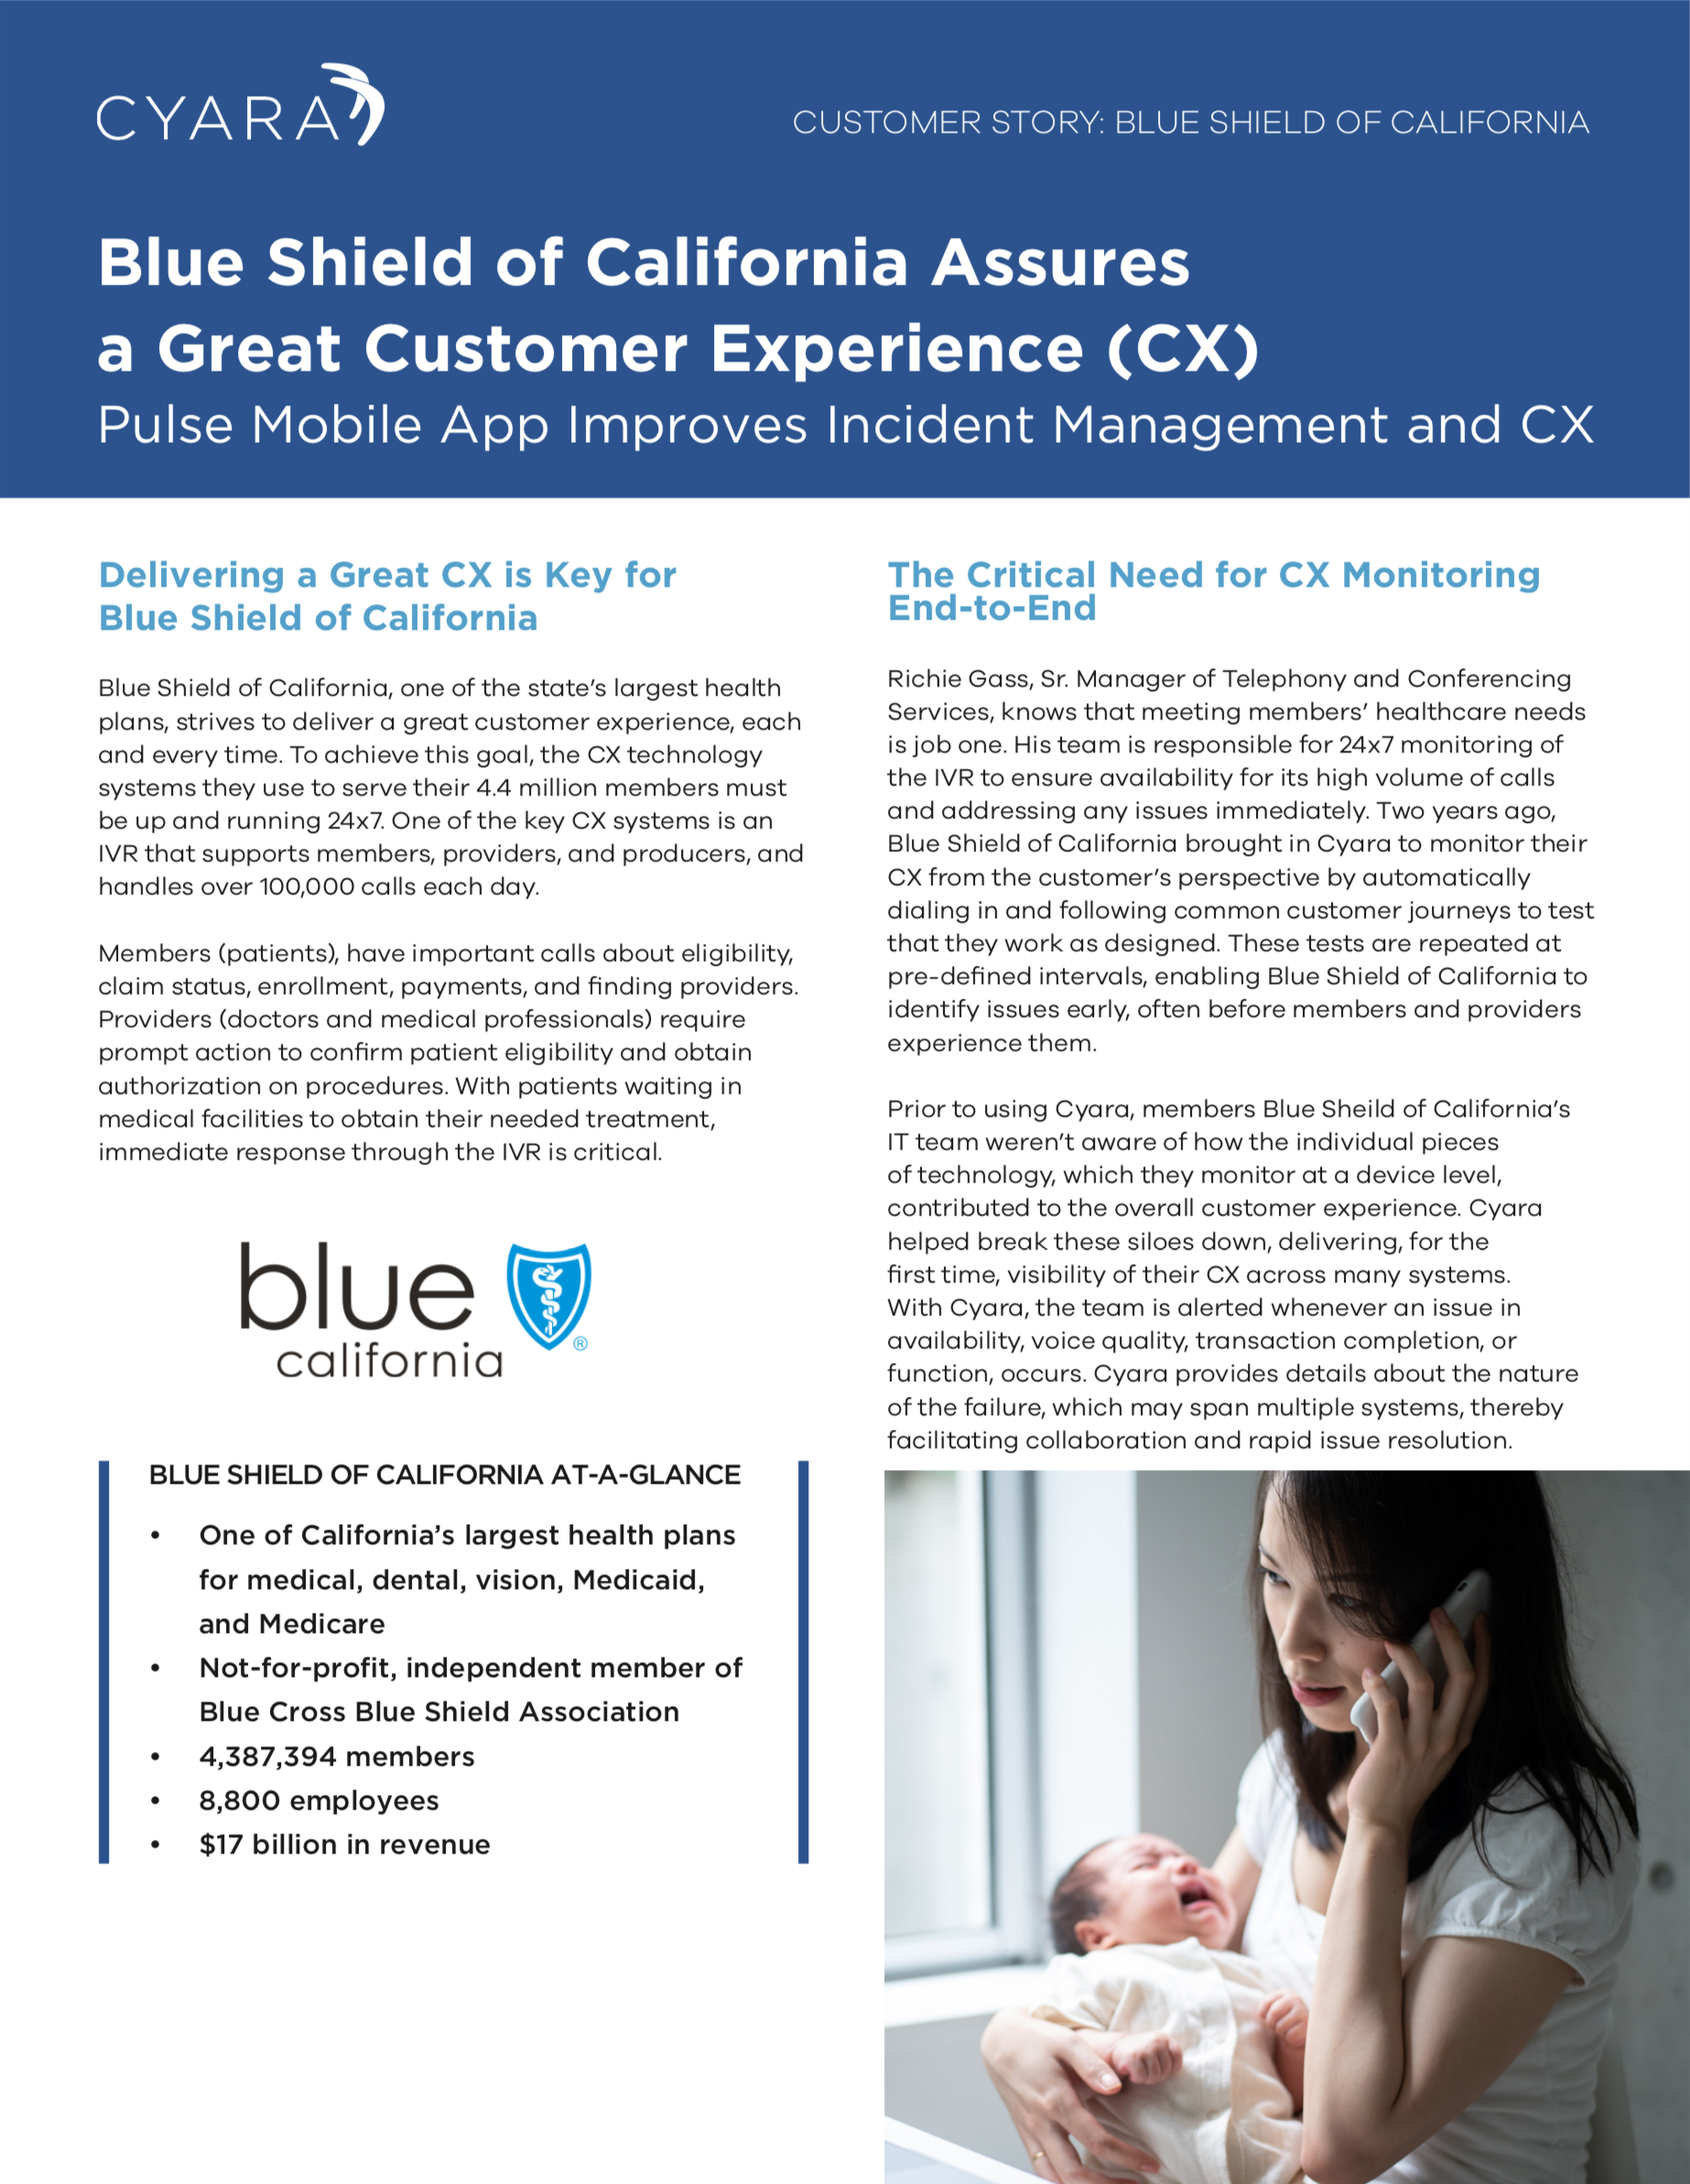 Learn how Blue Shield of California managers provide real-time visibility into overall CX health and compliance with SLAs.